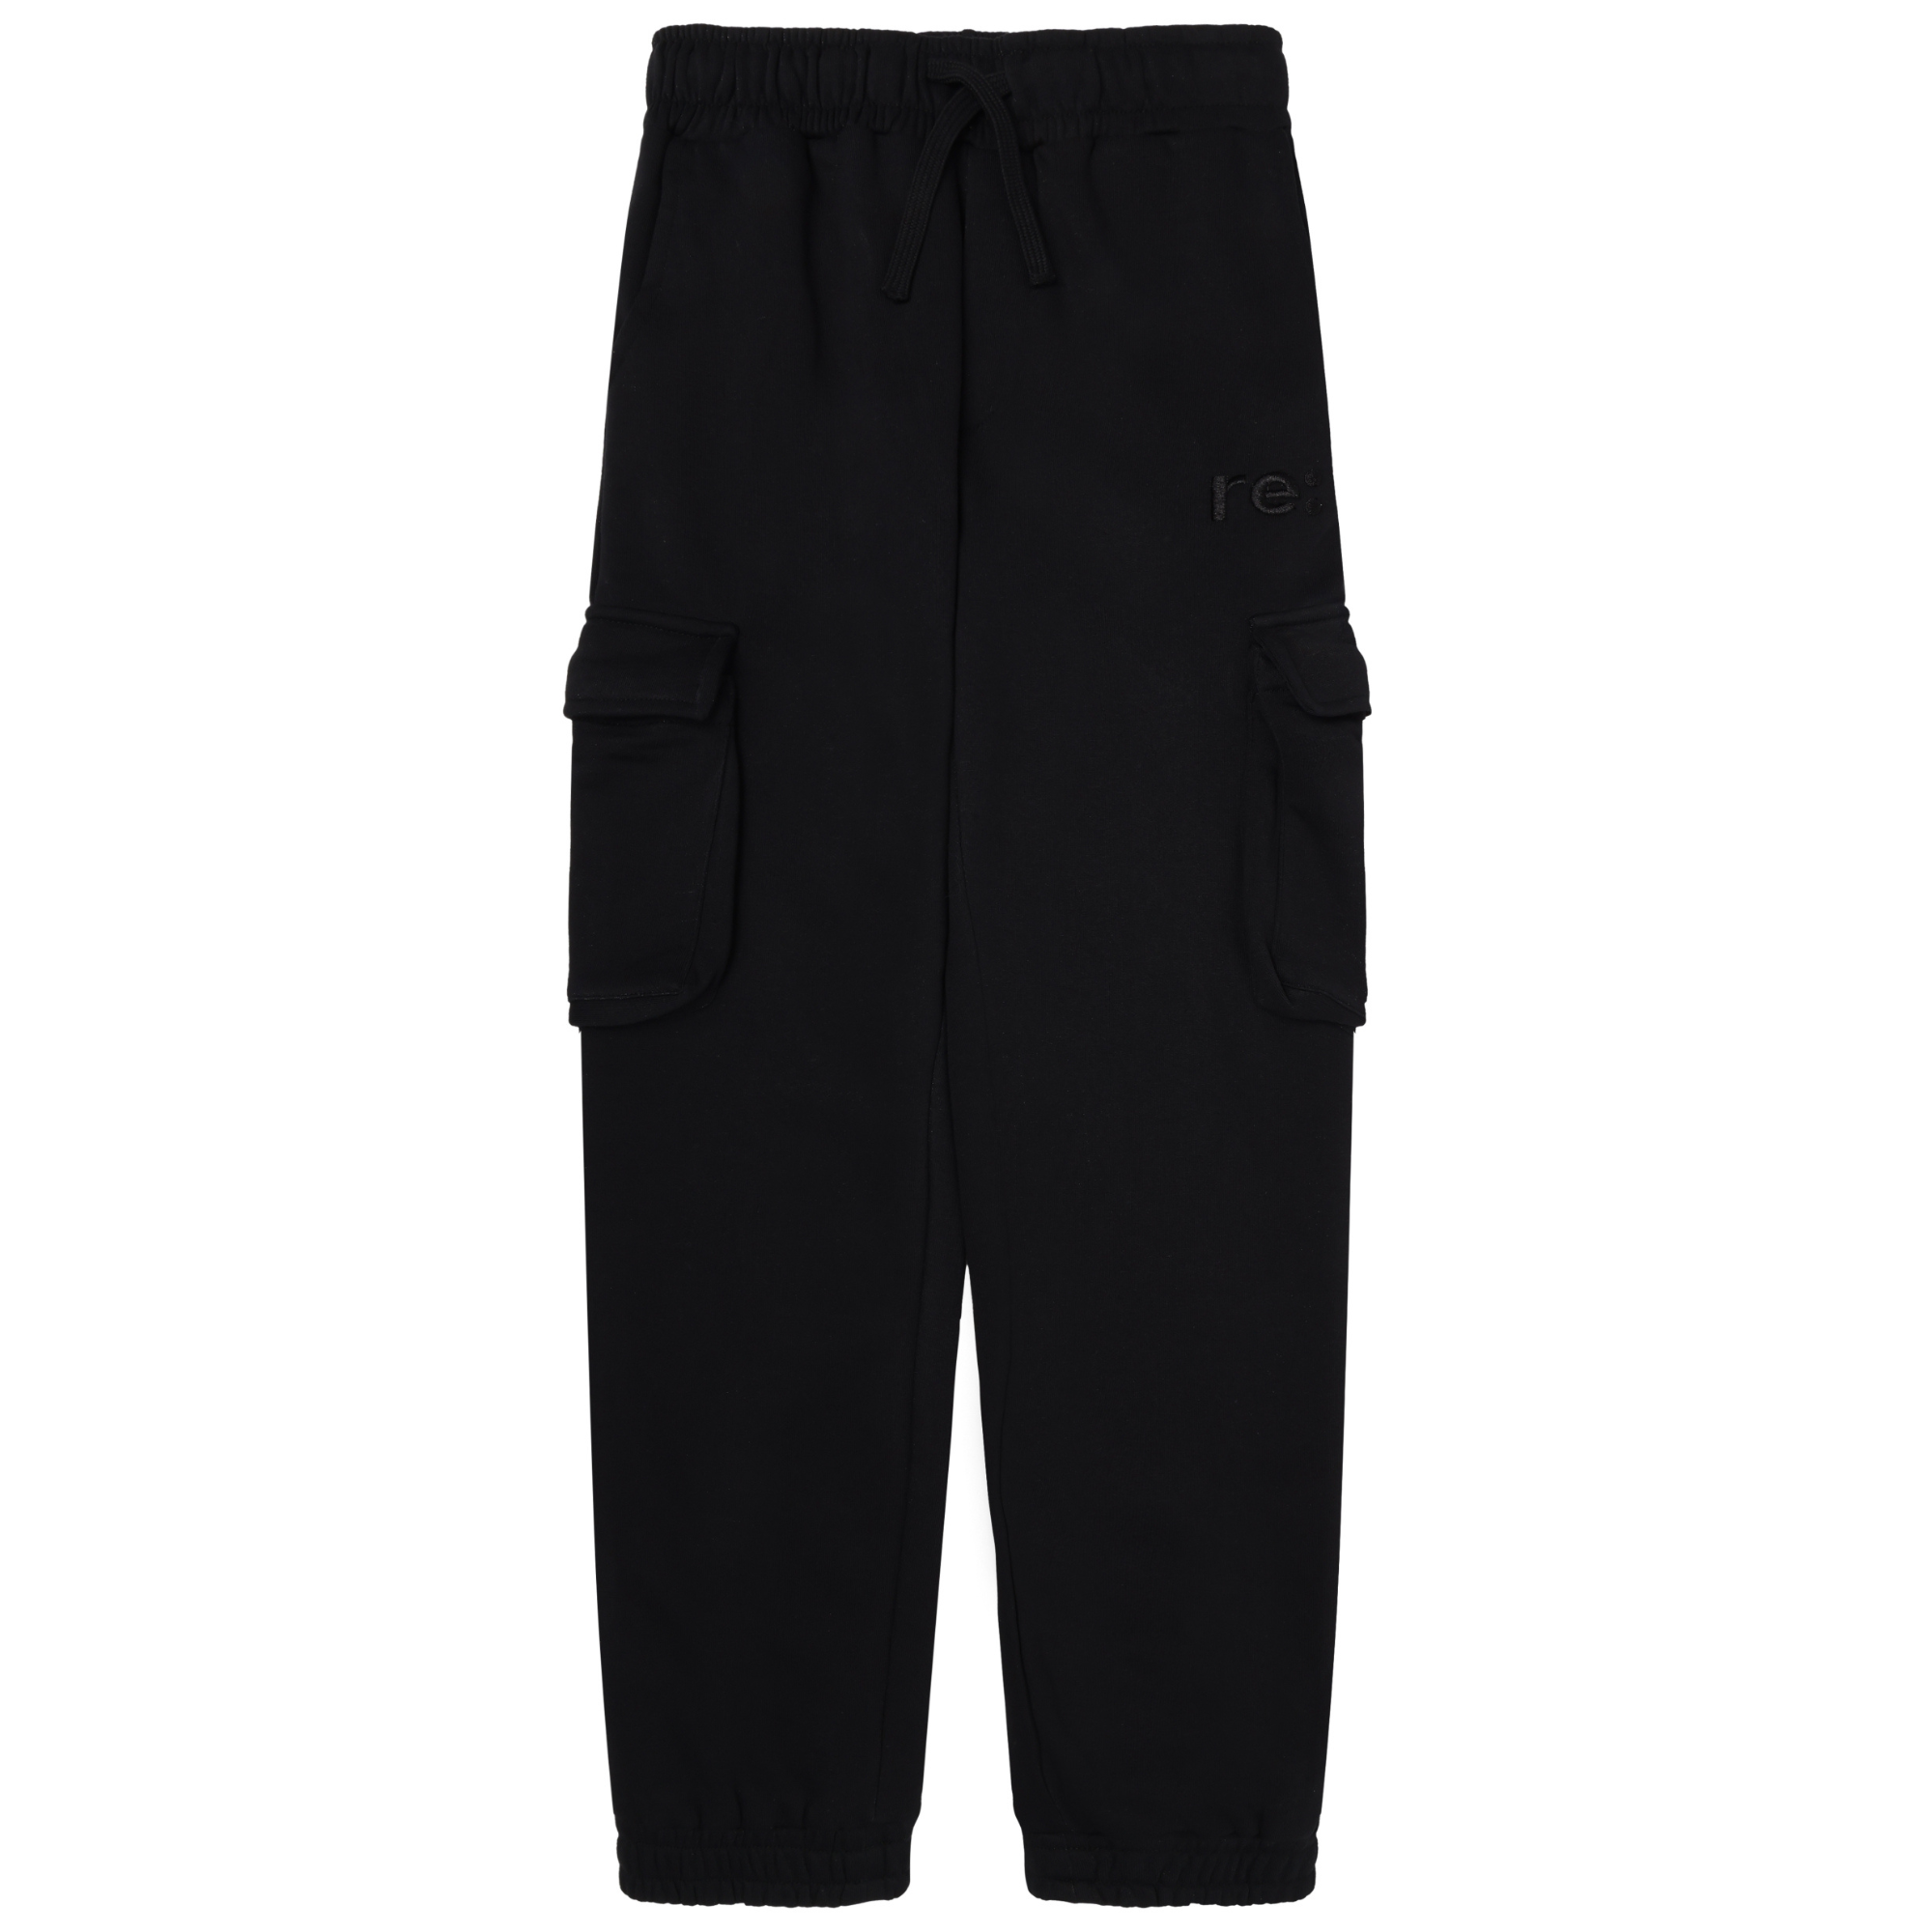 THE NEW - Re:charge Cargo Sweatpants, TN5479 - Black Beauty